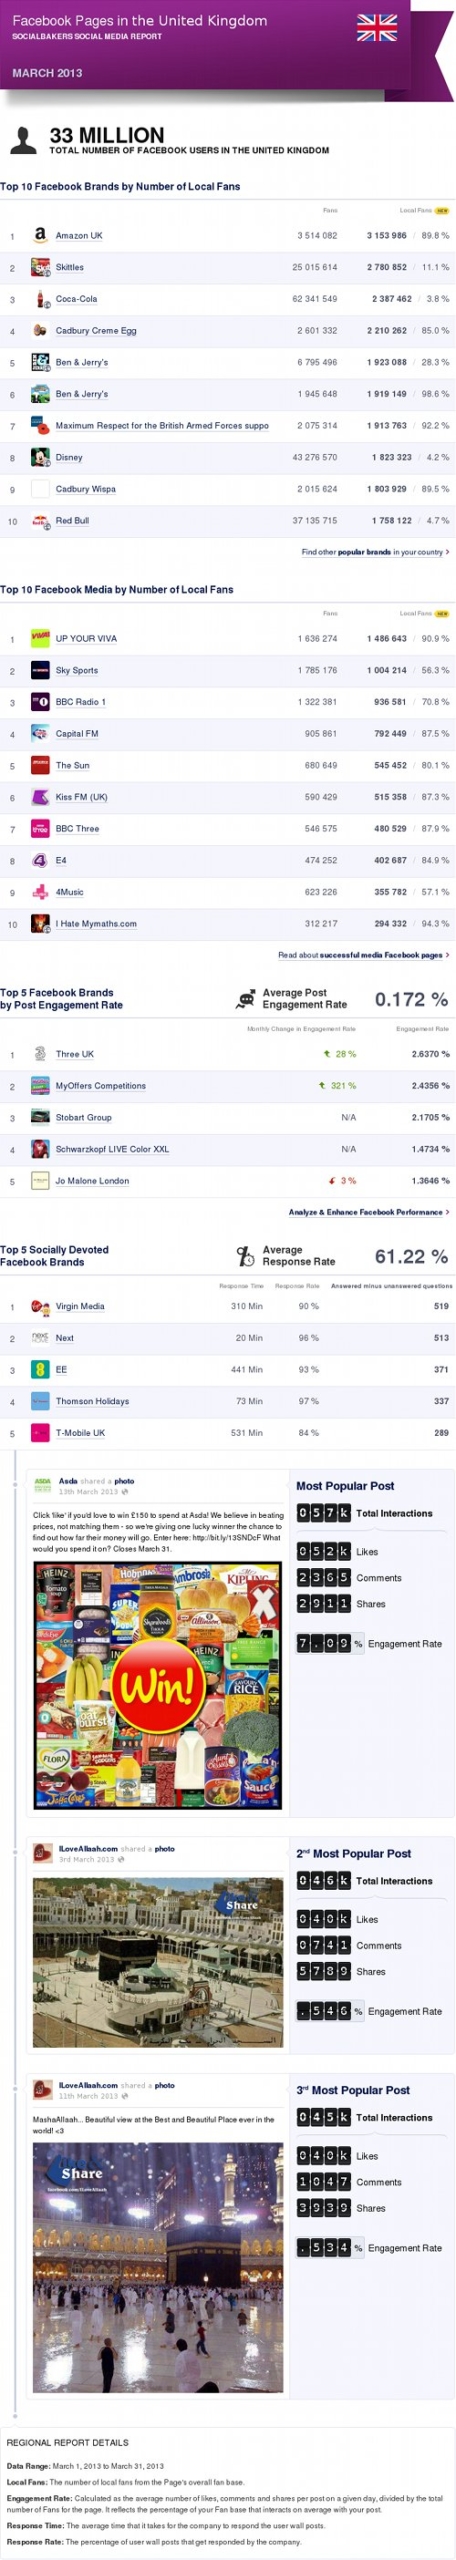 Top Facebook Pages in the UK, March ’13